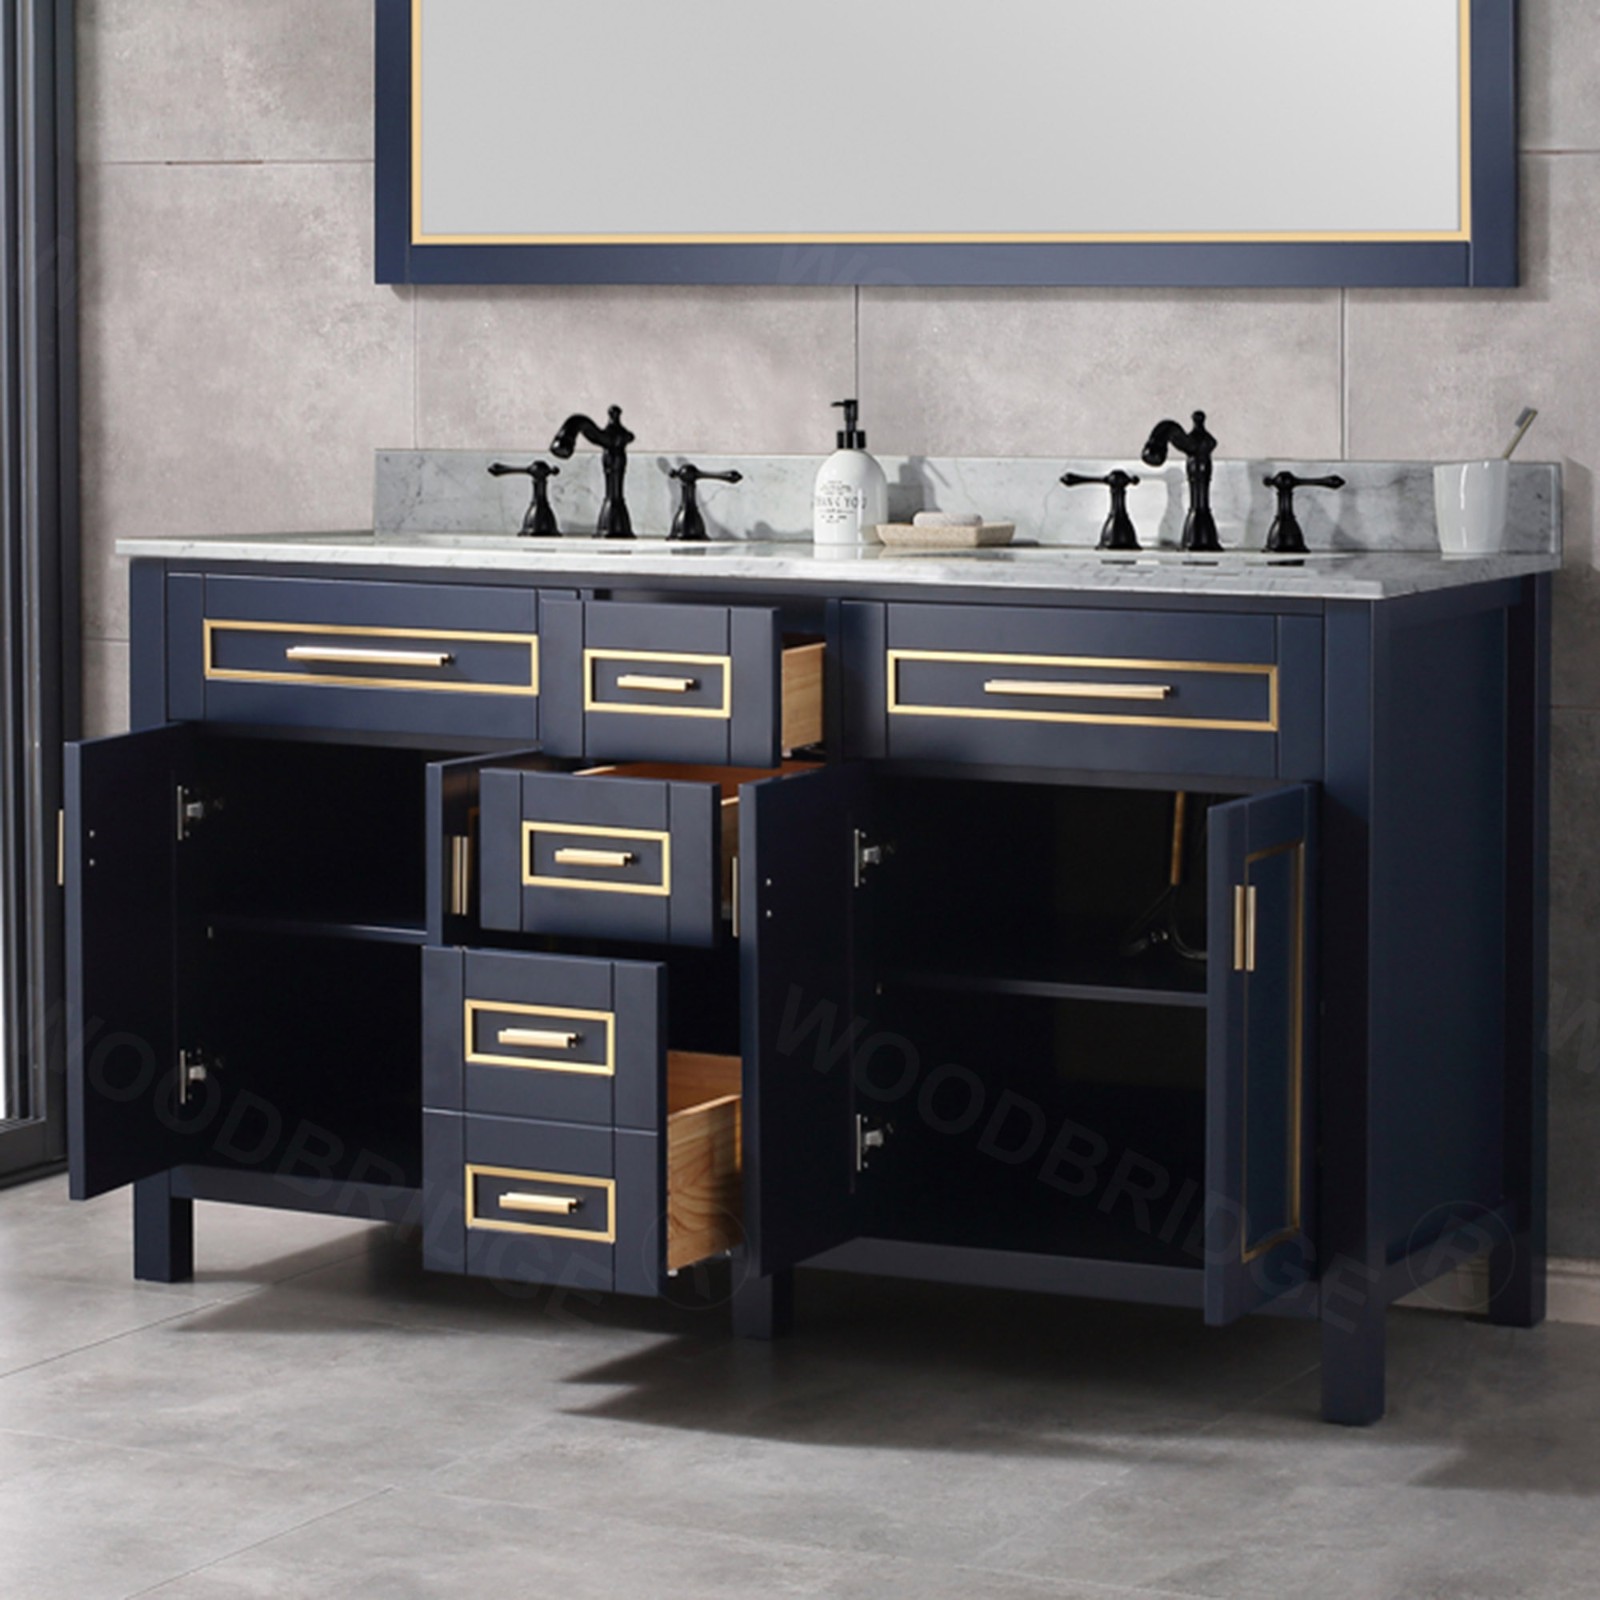  WOODBRIDGE Milan  61” Floor Mounted Single Basin Vanity Set with Solid Wood Cabinet in Navy Blue, and Carrara White Marble Vanity Top with Pre-installed Undermount Rectangle Bathroom Sink in White, Pre-Drilled 3-Hole for 8-inch Widespread Faucet_4649